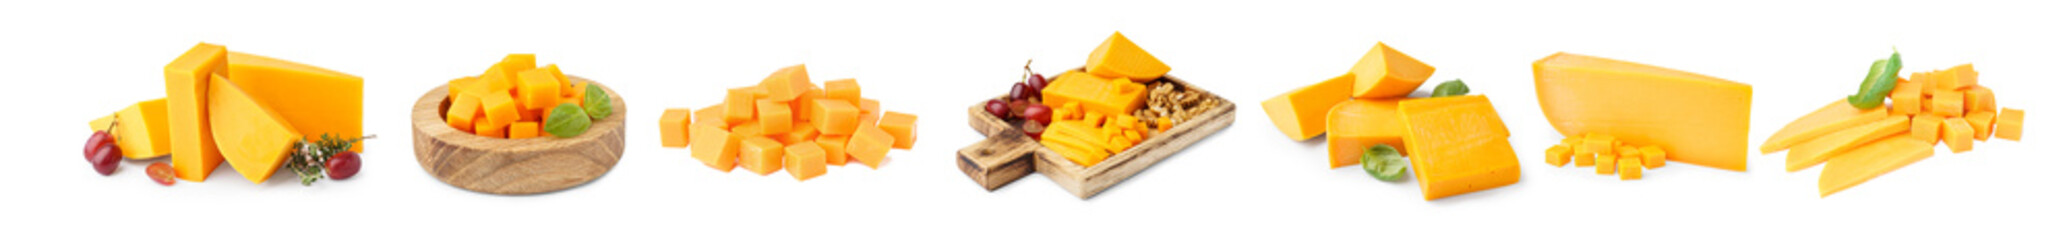 Set of tasty cheddar cheese on white background